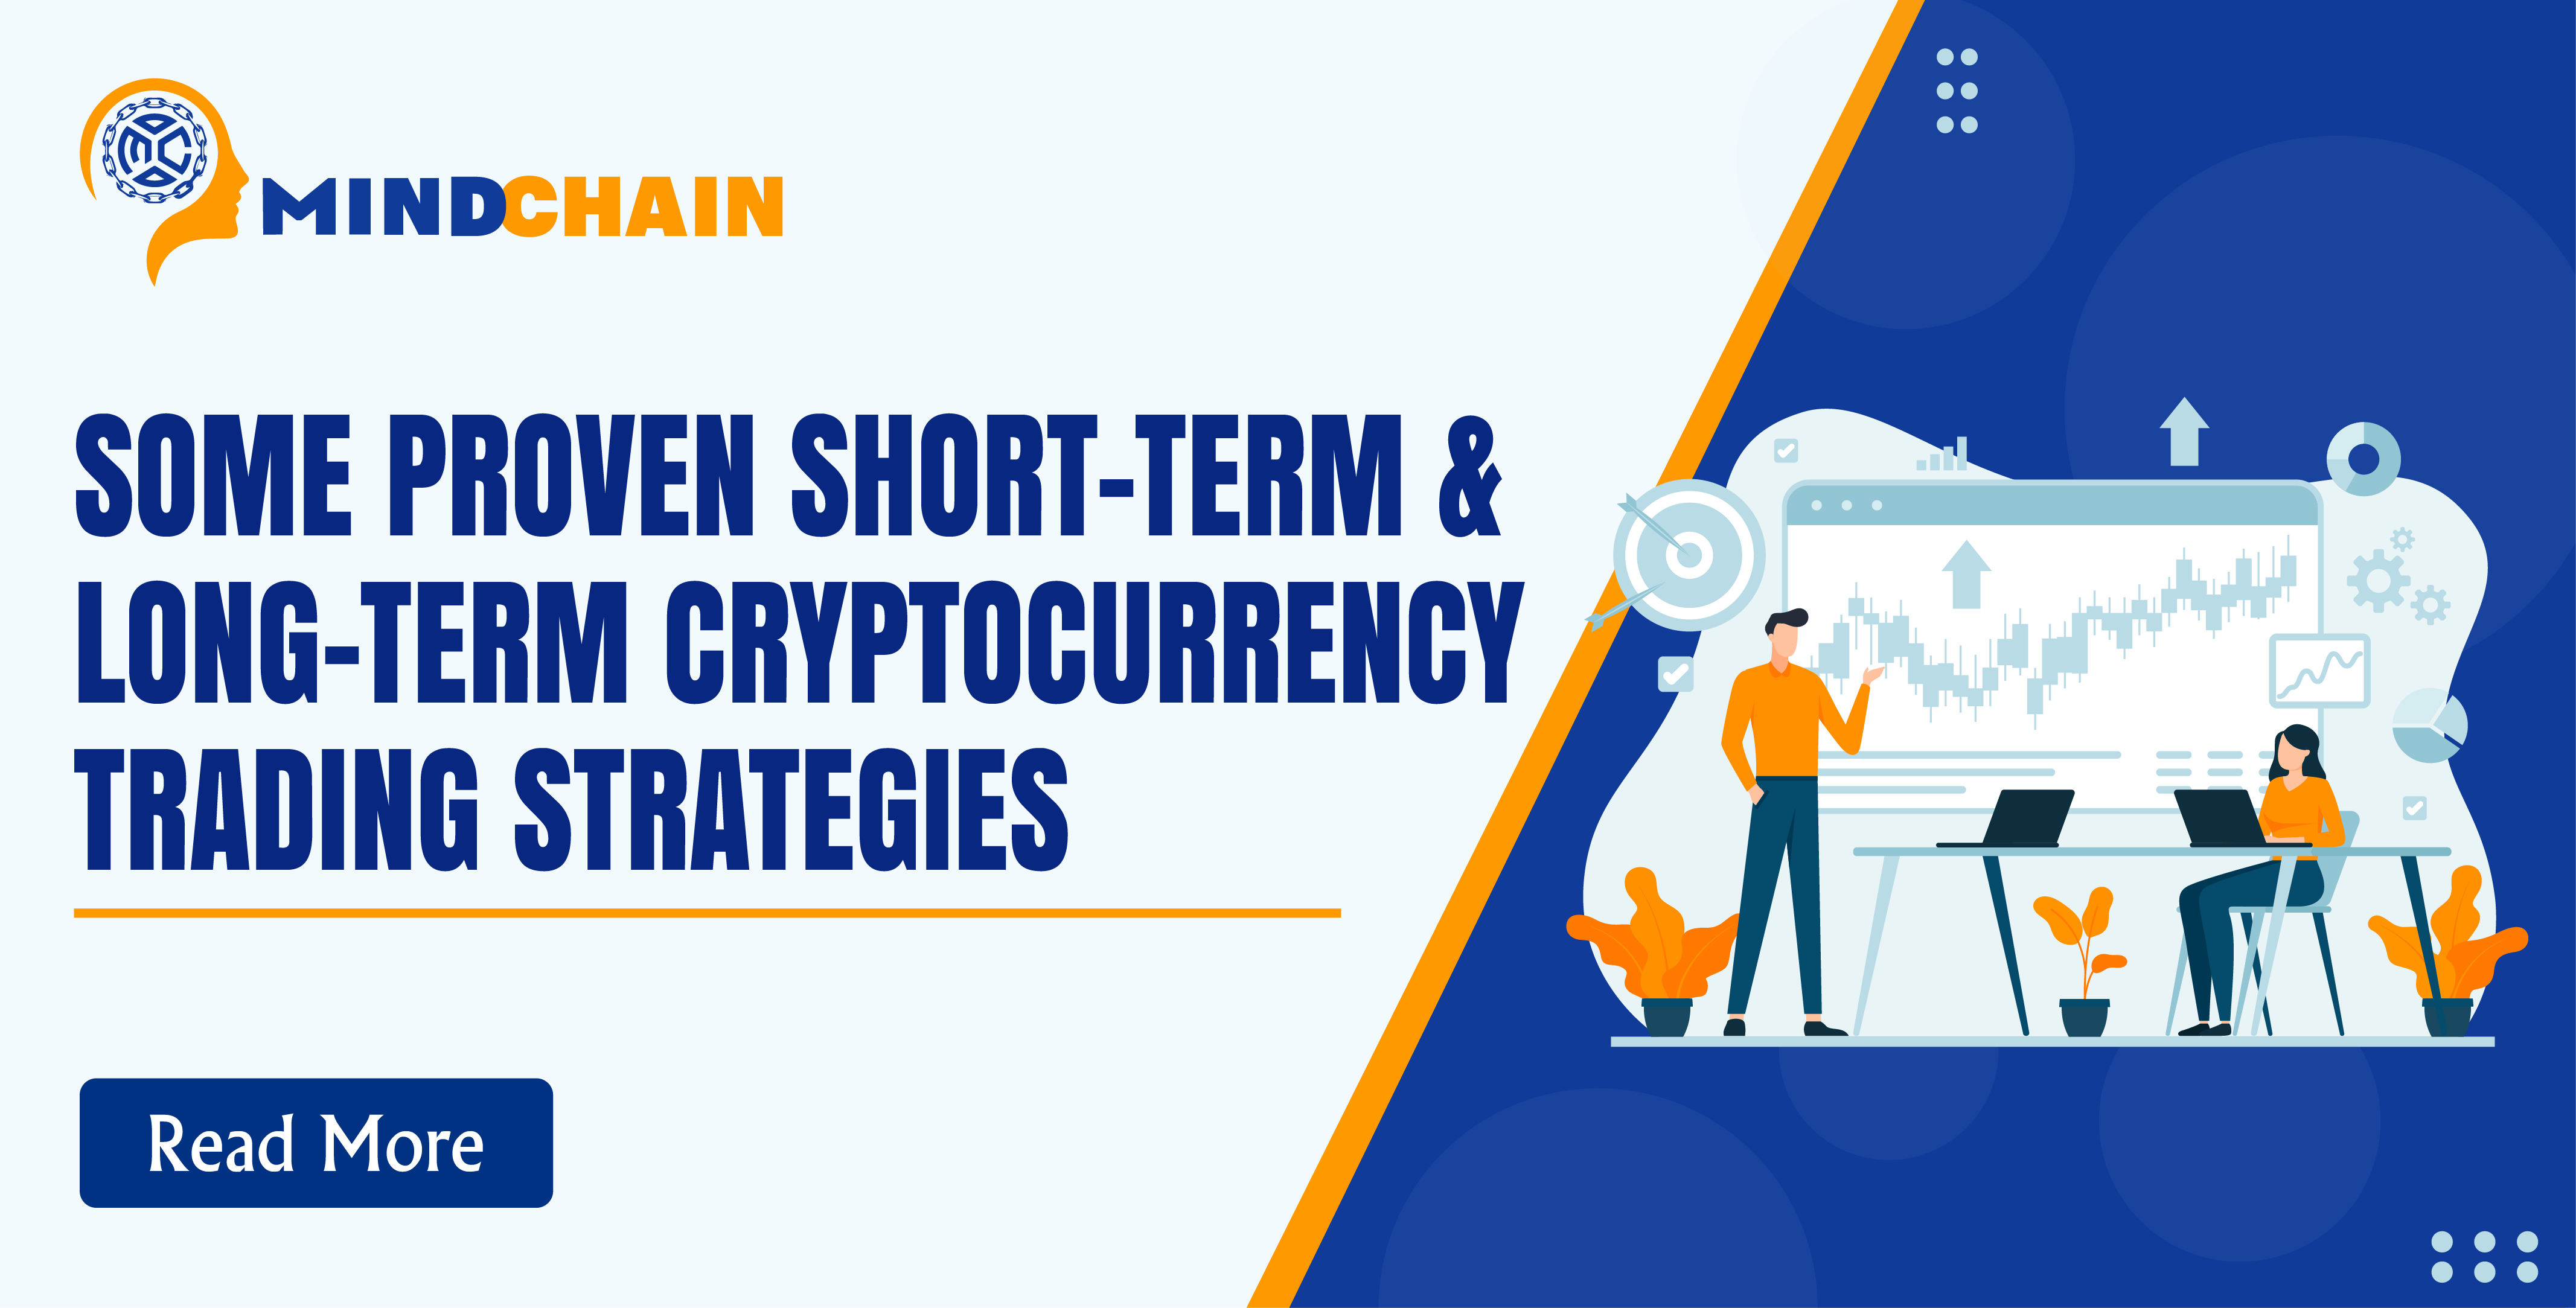 Some Proven Short-Term & Long-Term Cryptocurrency Trading Strategies